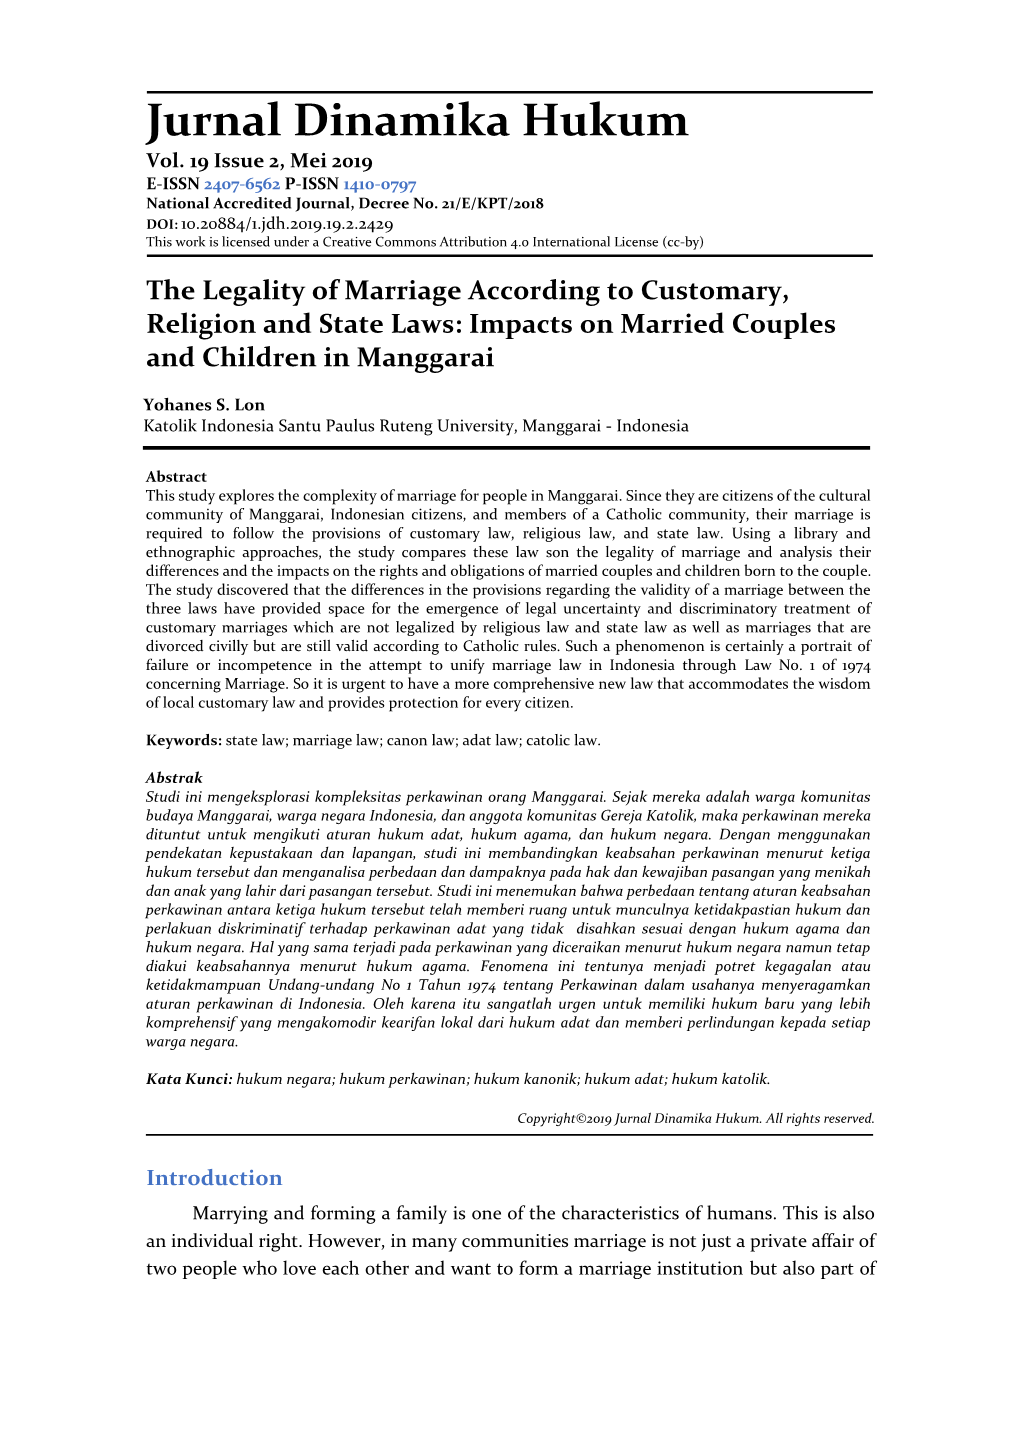 Impacts on Married Couples and Children in Manggarai